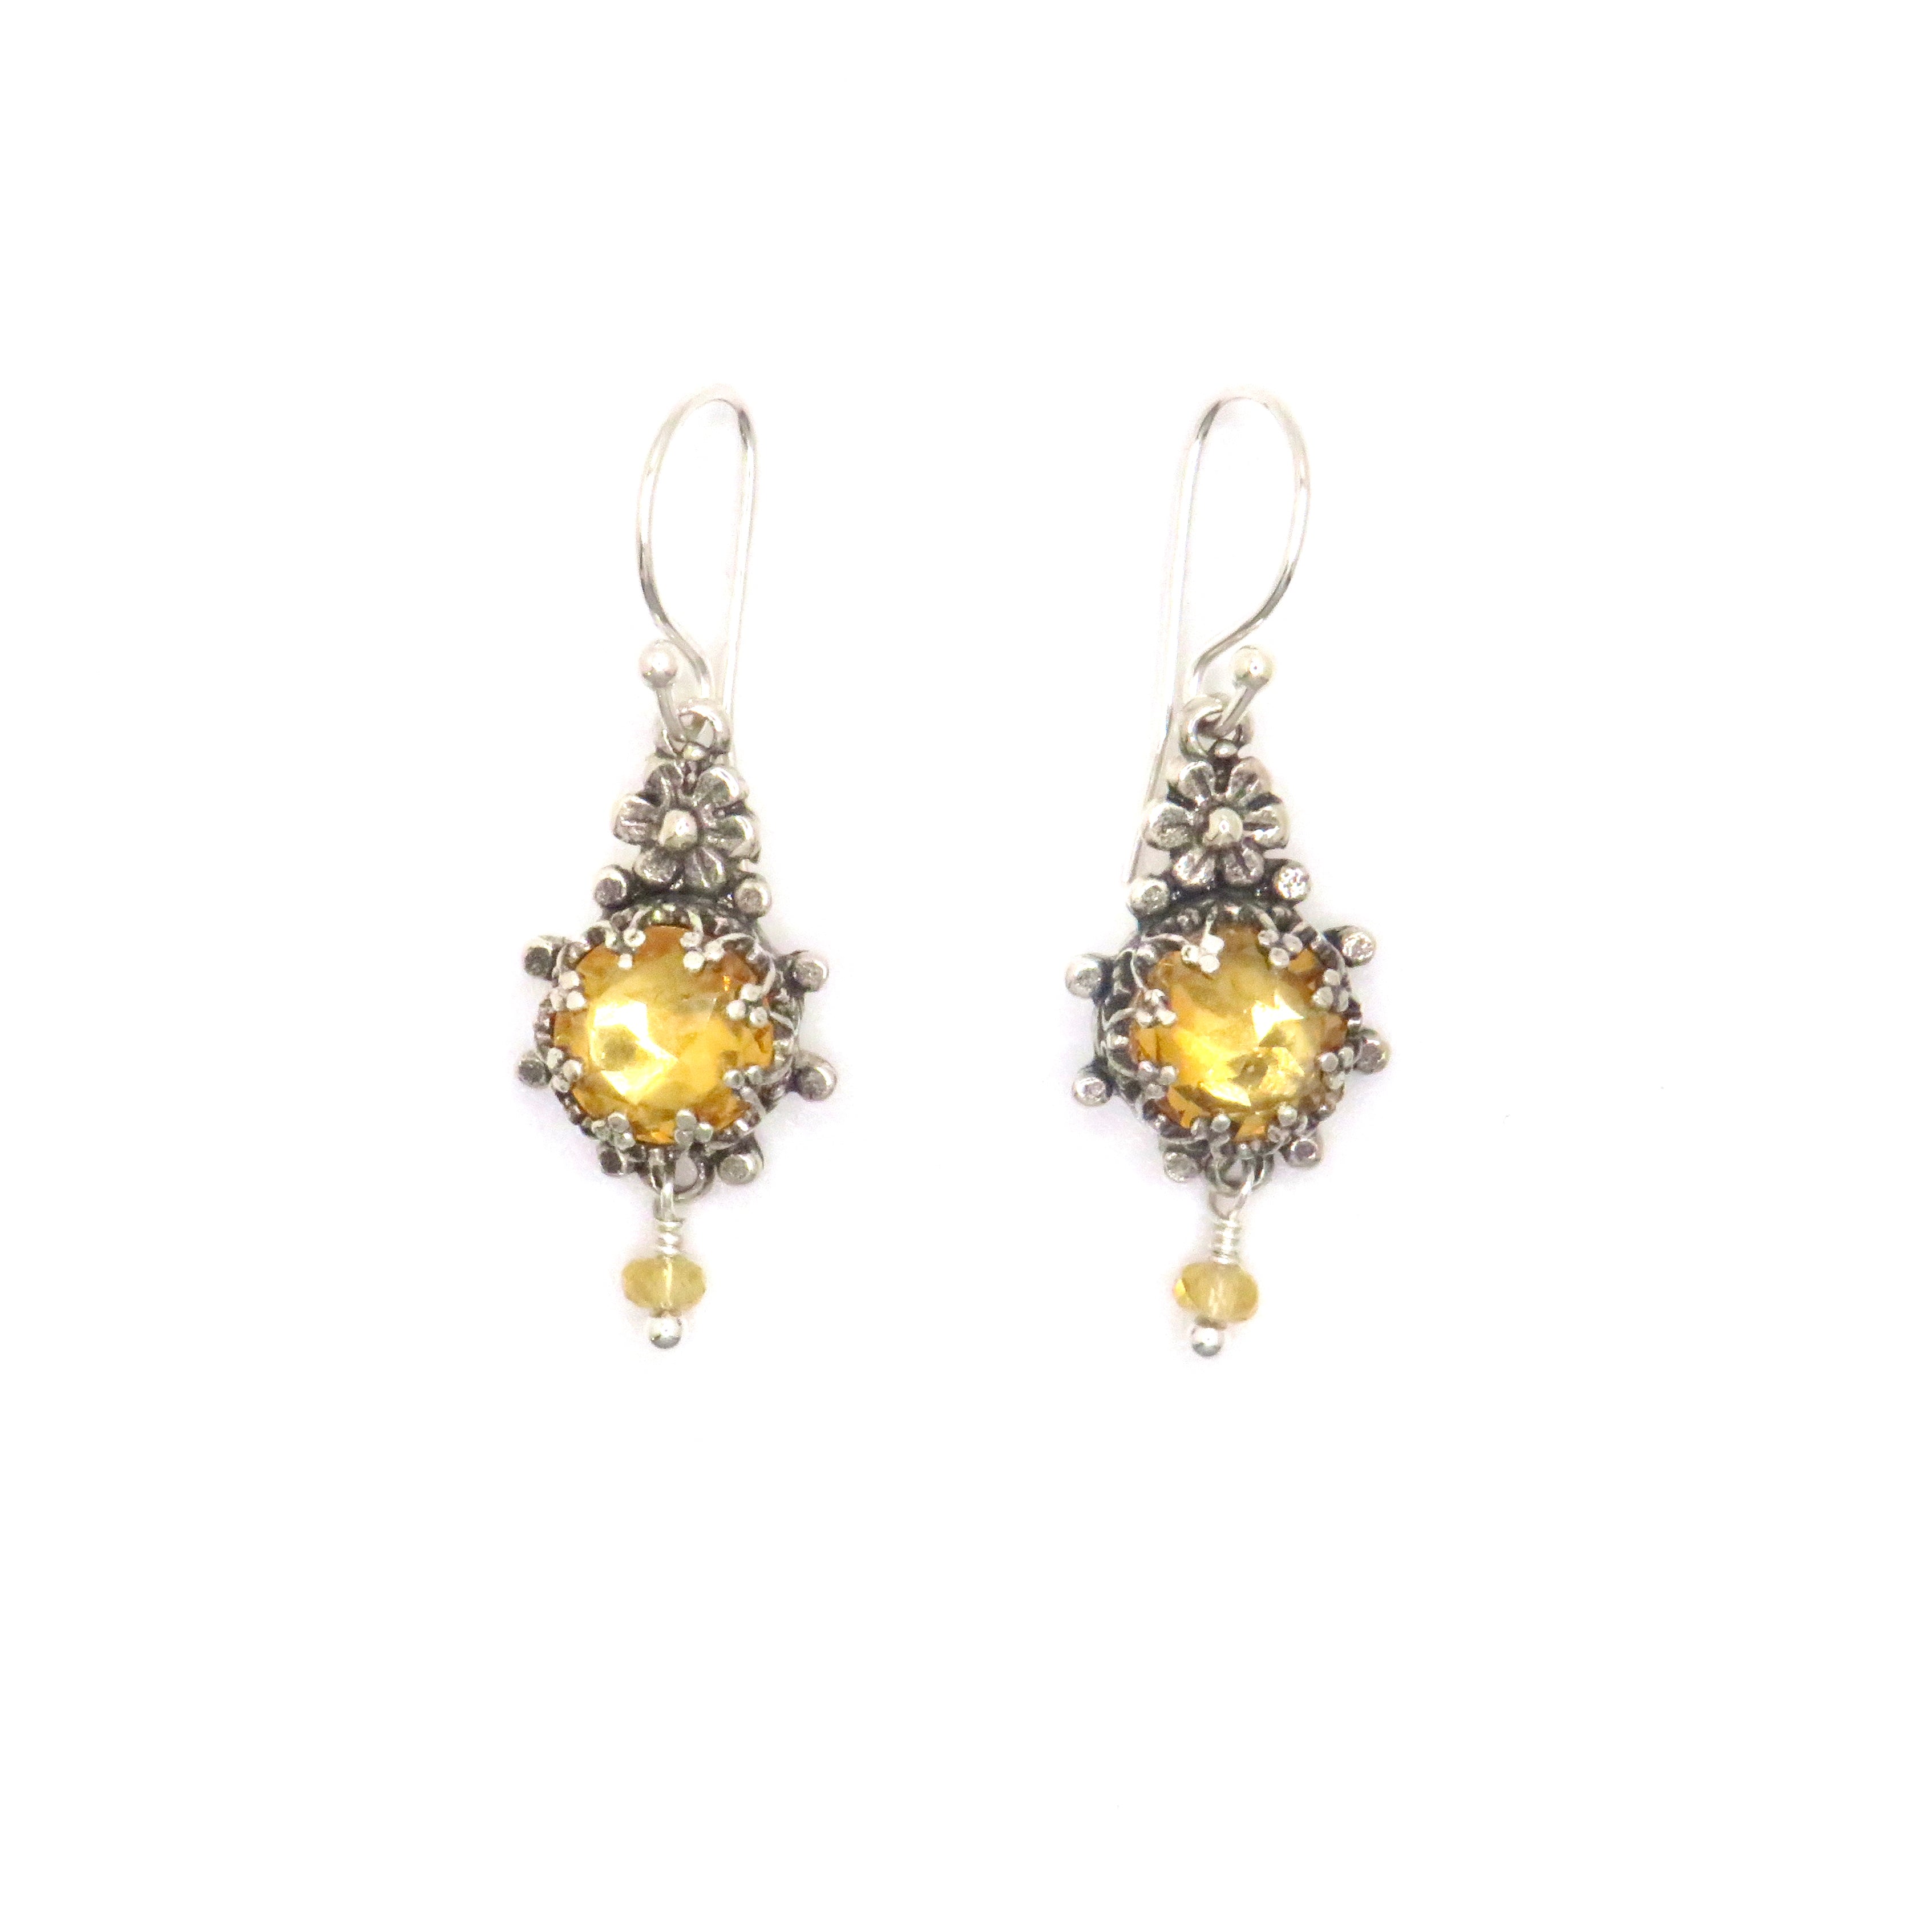 Small Citrine and Sterling Silver Filigree Daisy Earrings